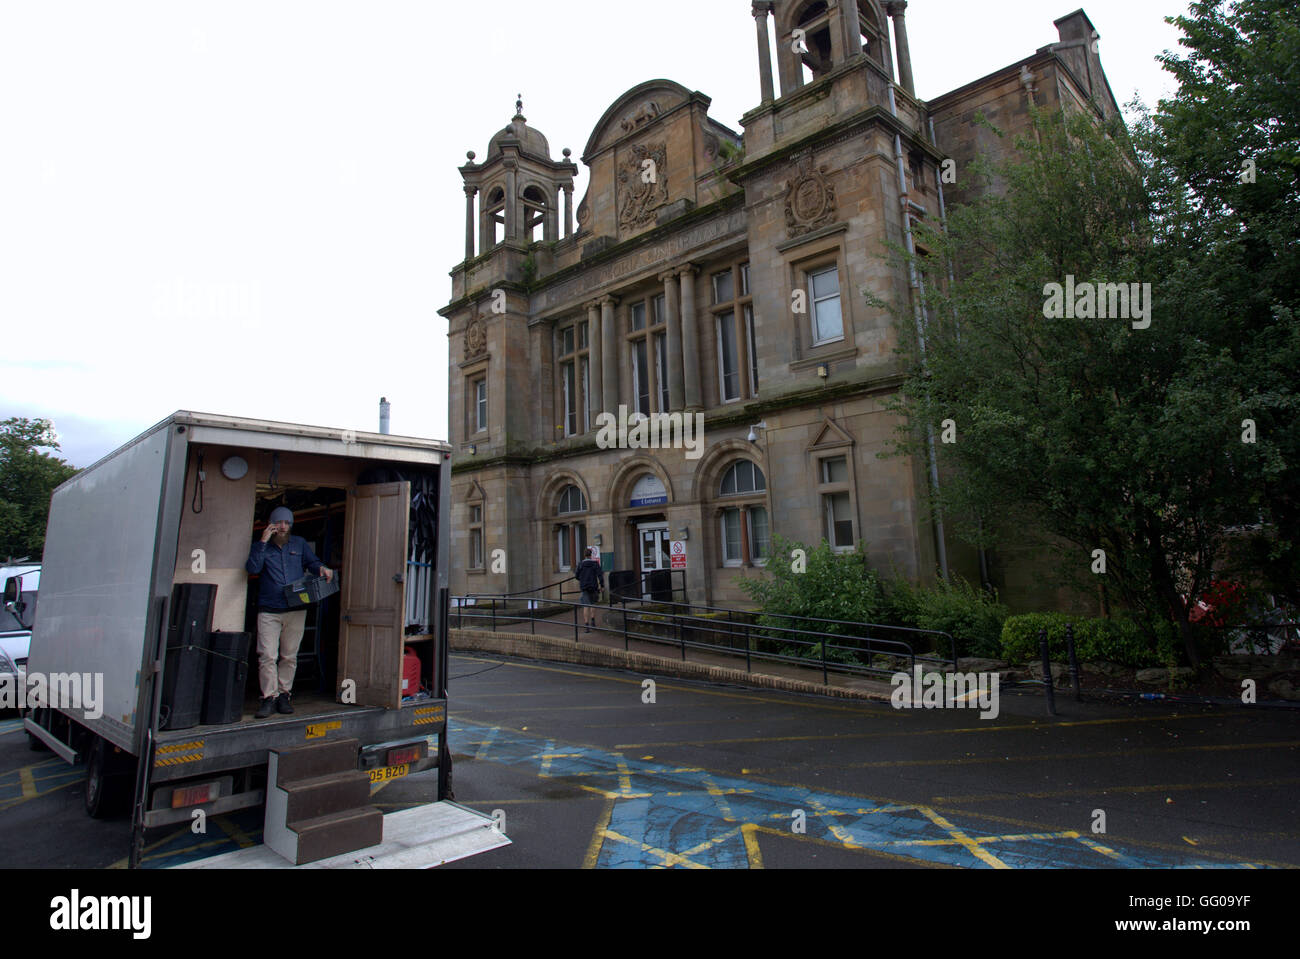 Glasgow, Scotland, UK 3rd August 2016. Outlander stars and crew in defunct hospital. The British-American television drama series based on the historical time travel Outlander series of novels by Diana Gabaldon is secretly filming the new third series this as new characters are introduced  this week in the now closed Victoria Infirmary in Southern Glasgow. Credit:  Gerard Ferry/Alamy Live News Stock Photo